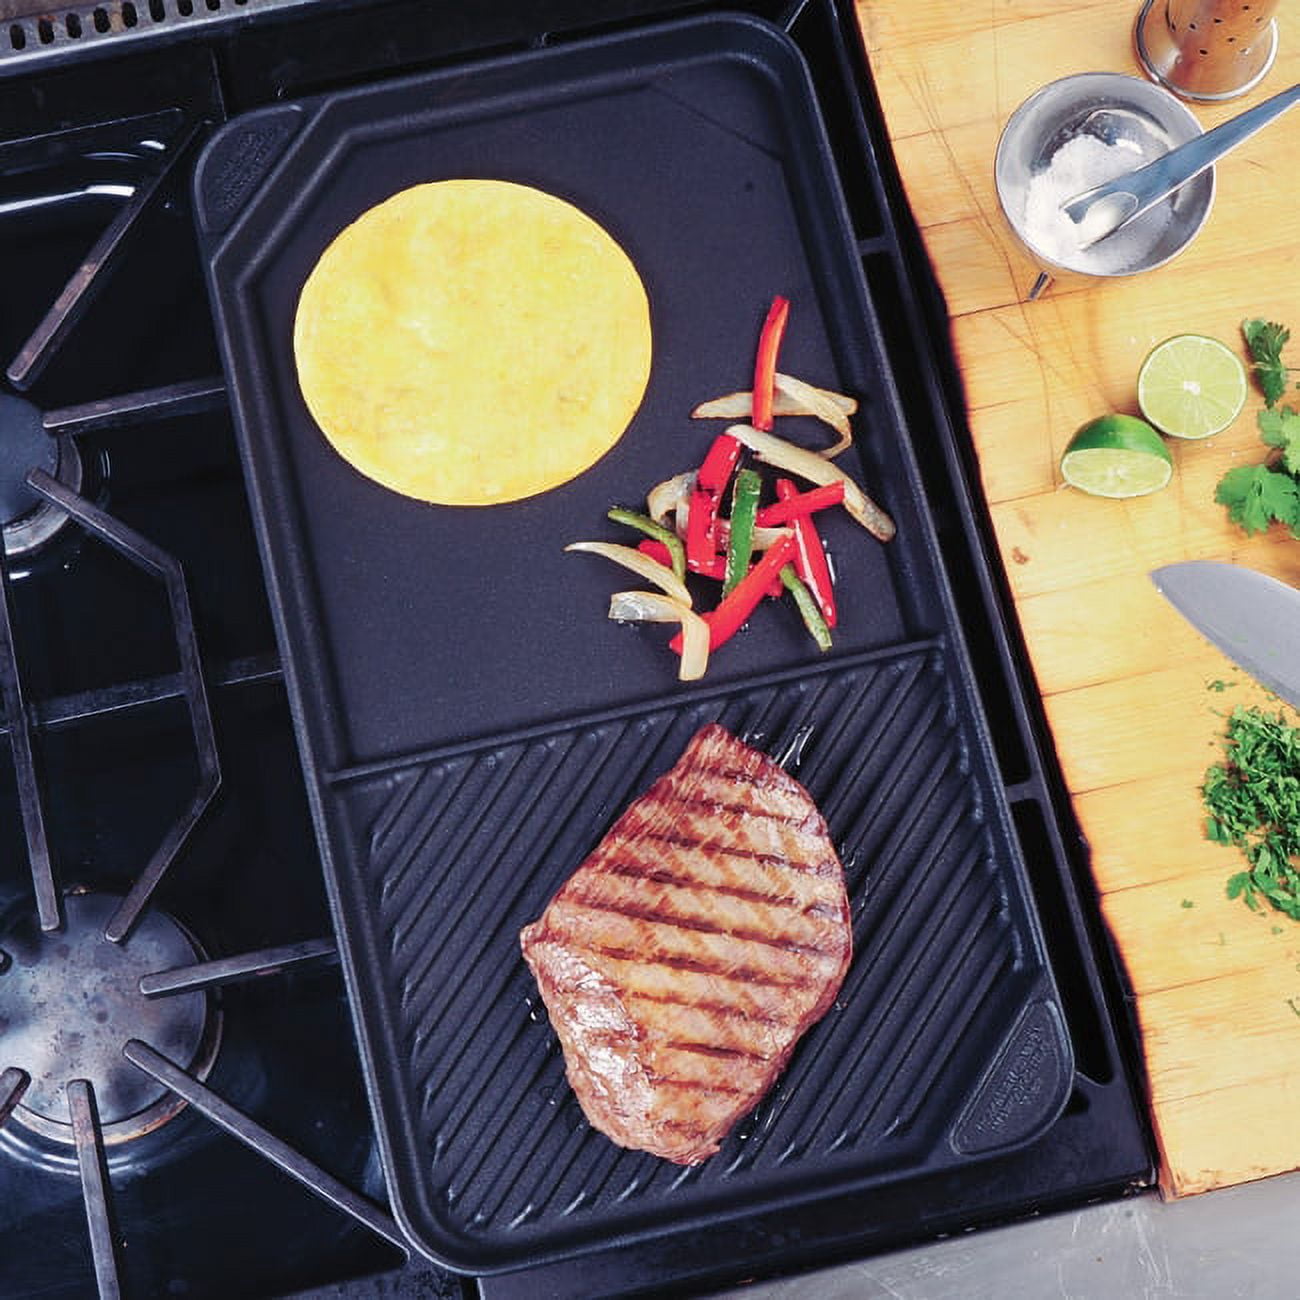 Better Chef Aluminum Griddle with Side Handles